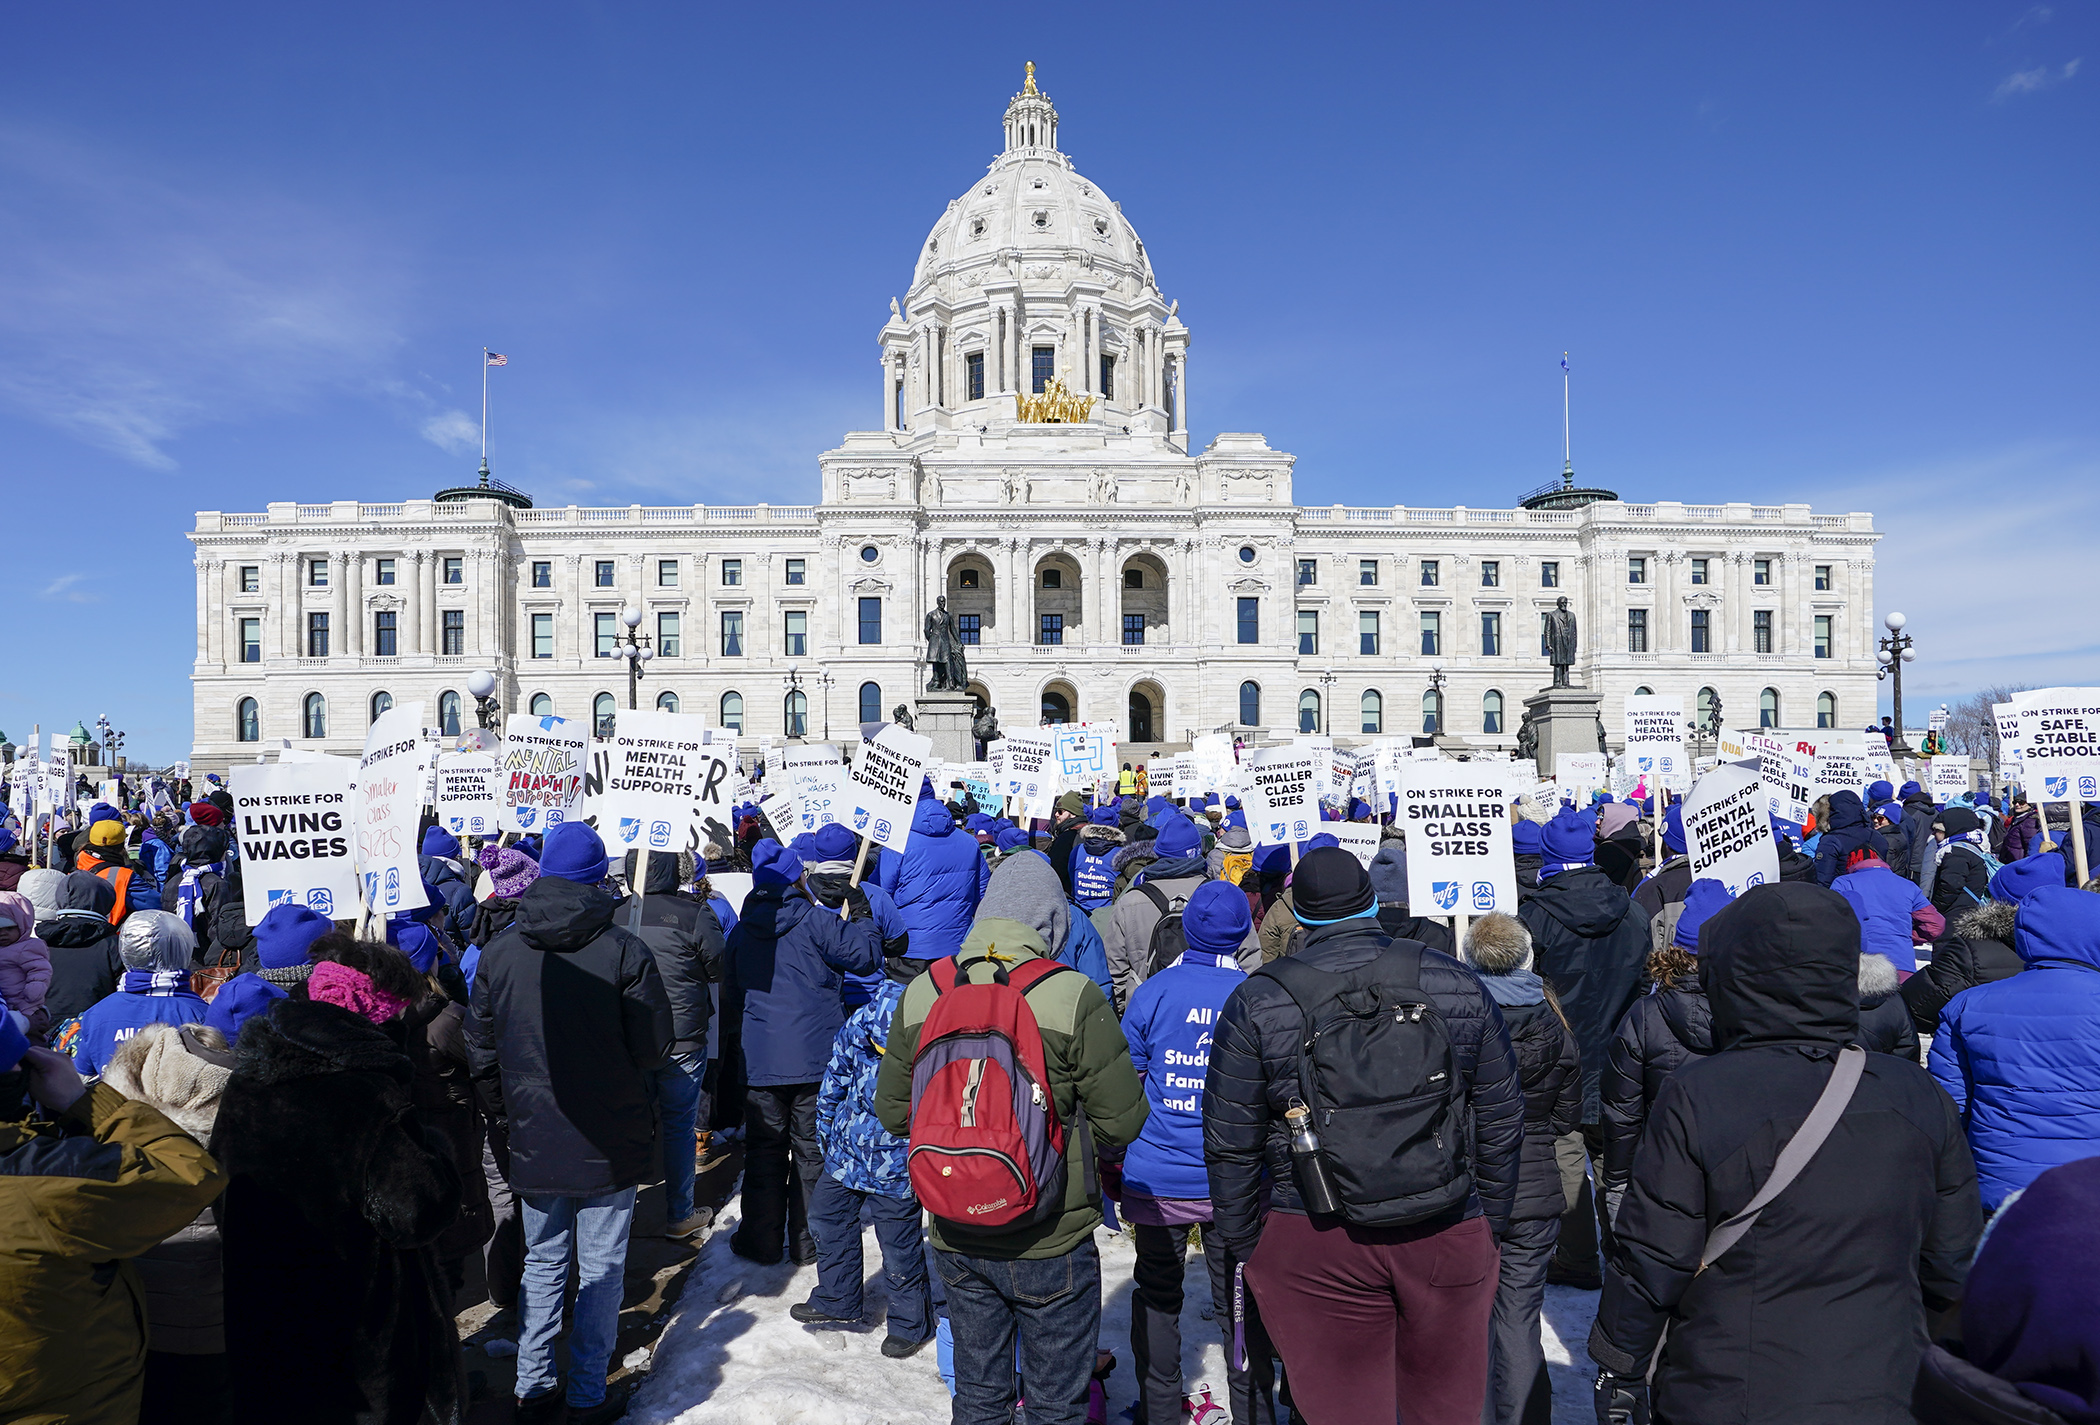 Striking Minneapolis teachers rallied in front of the Capitol in March 2022. HF3446 would make striking workers eligible for unemployment benefits, provided they otherwise meet unemployment eligibility requirements. (House Photography file photo)